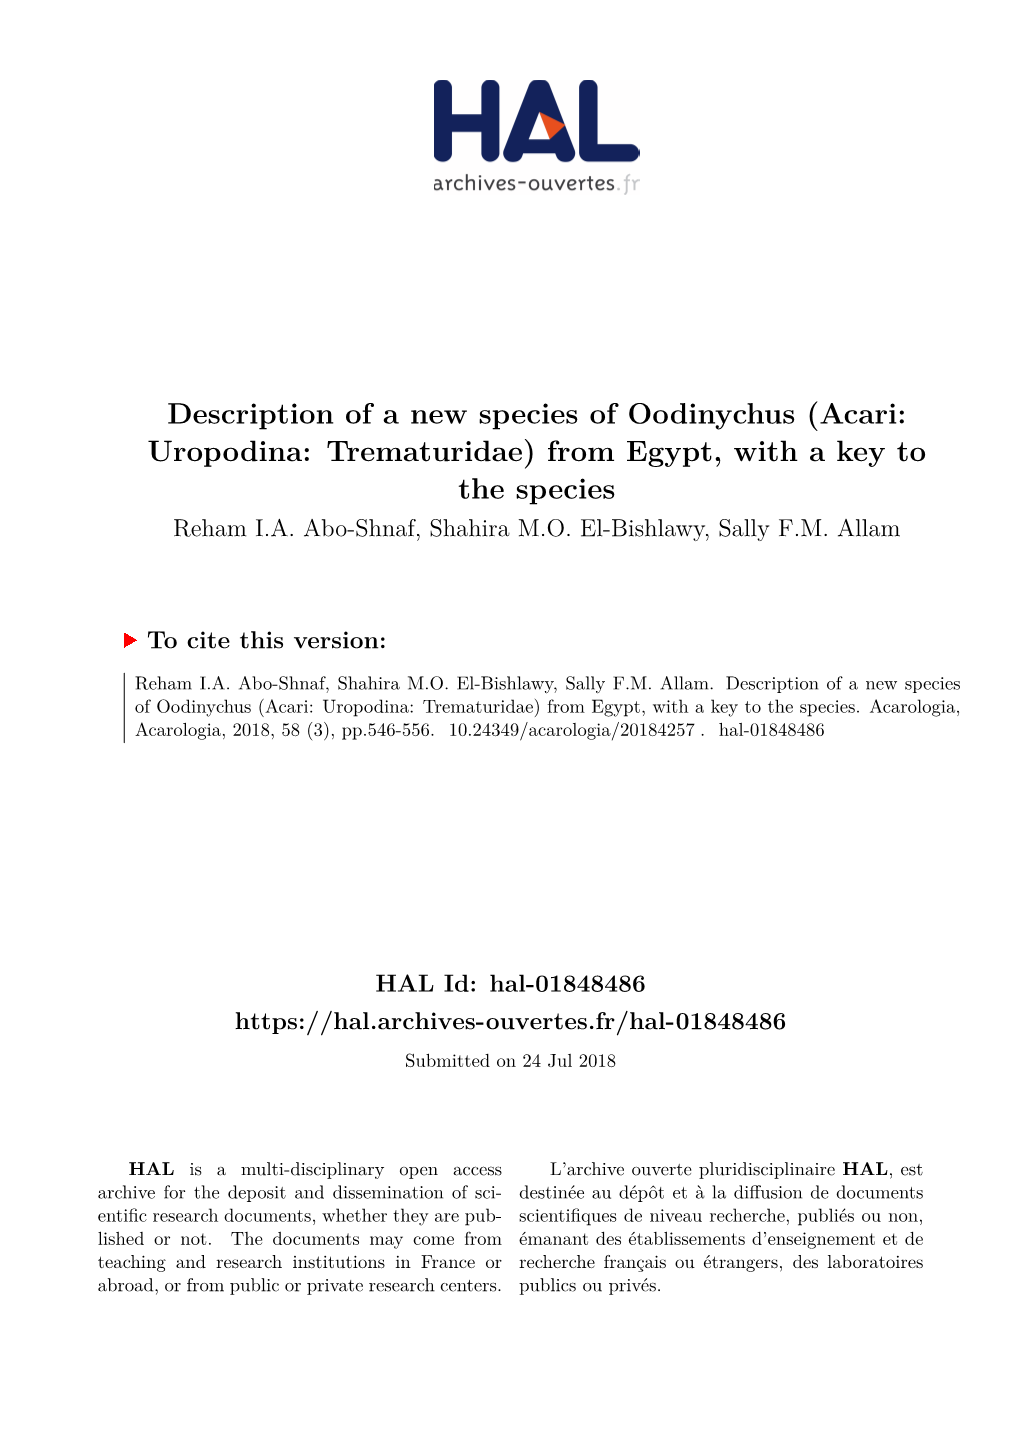 Description of a New Species of Oodinychus (Acari: Uropodina: Trematuridae) from Egypt, with a Key to the Species Reham I.A